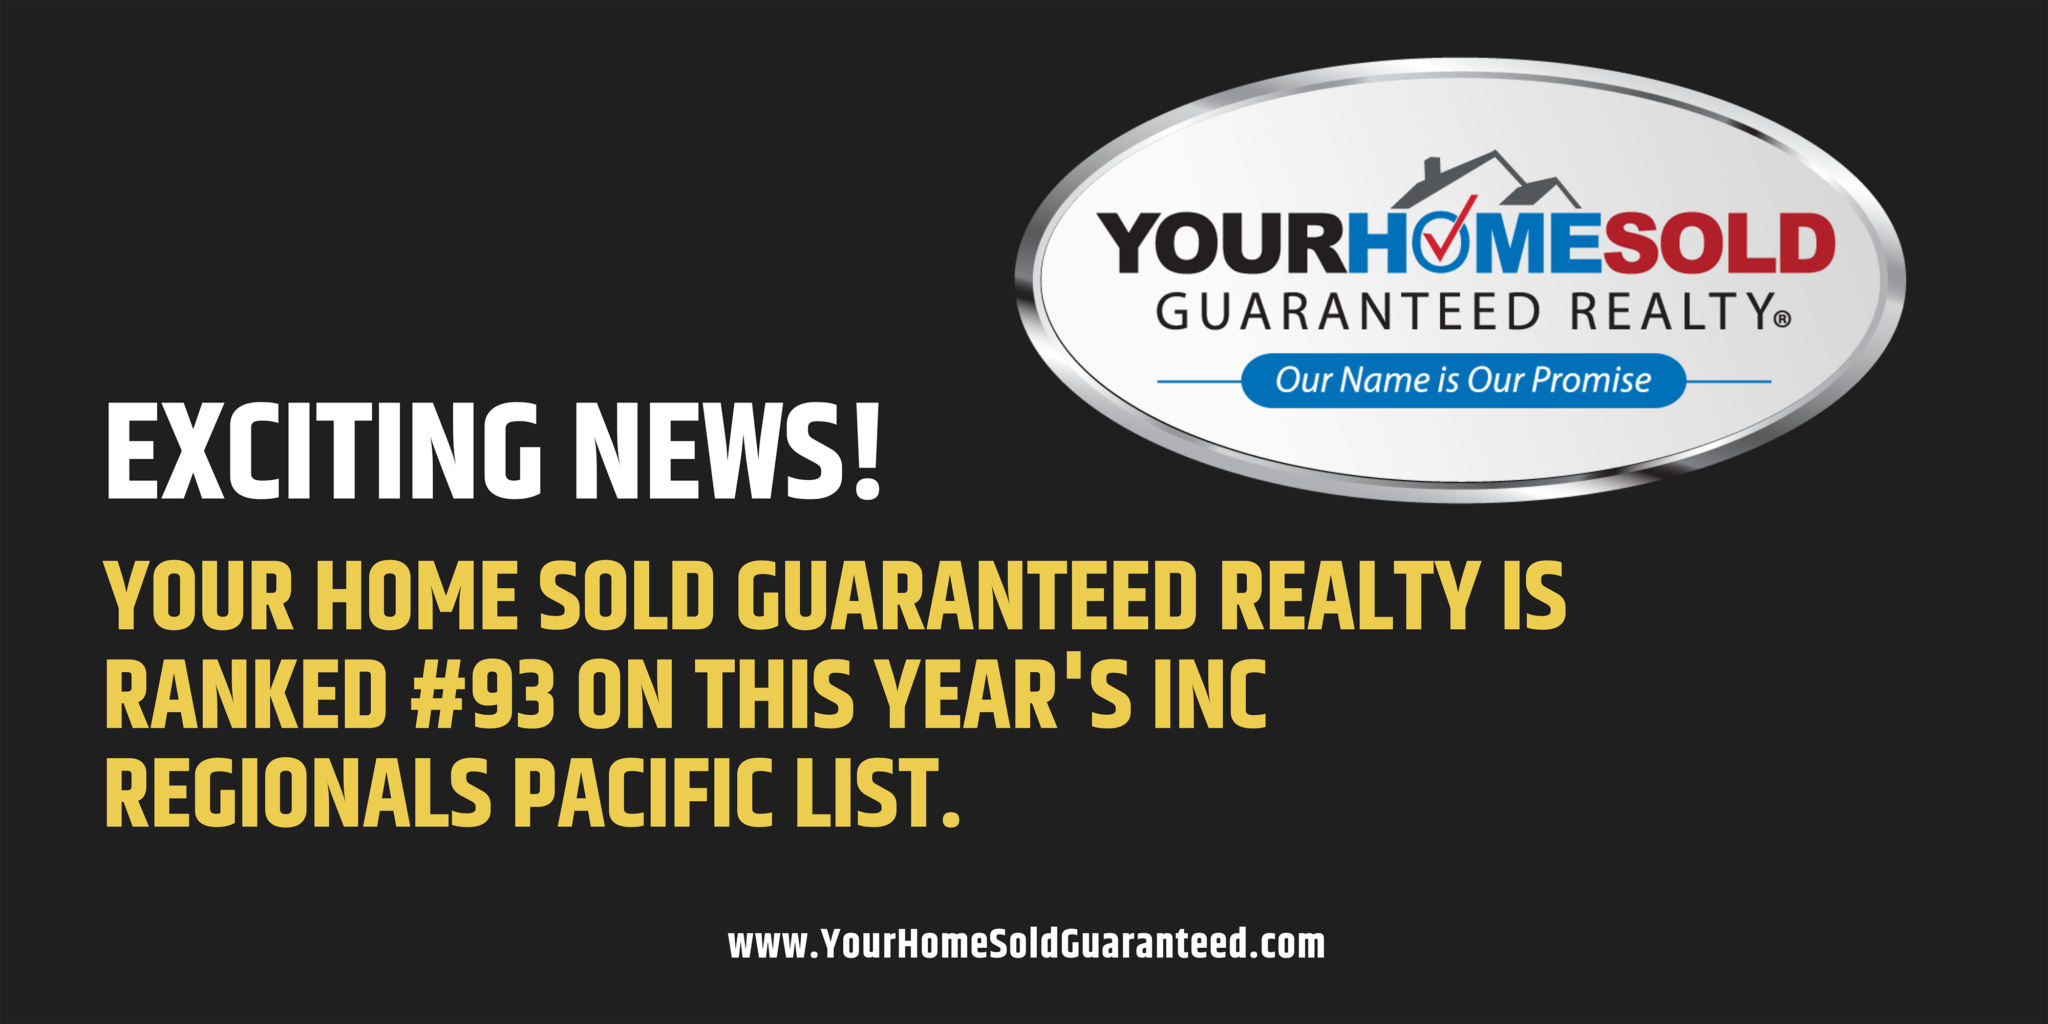 With-a-Two-Year-Revenue-Growth-of-178-Your-Home-Sold-Guaranteed-Realty-Ranks-No.-93-on-Inc.-Magazines-List-of-the-Pacific-Regions-Fastest-Growing-Private-Companies-Resize-2048x1024.png